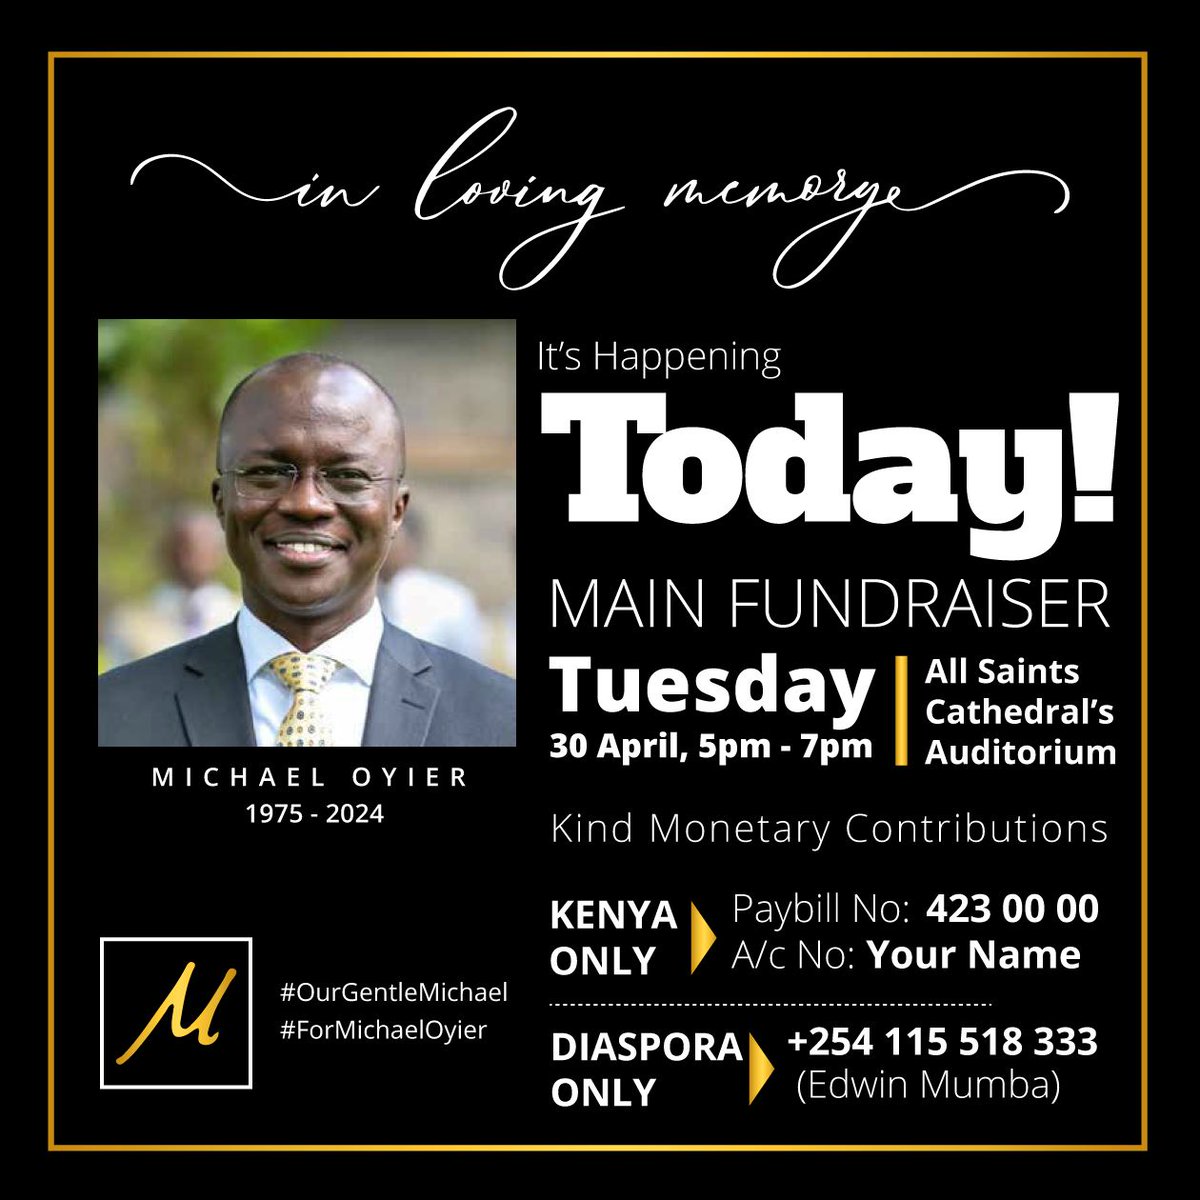 “We make a living by what we get, but we make a life by what we give.” – Winston Churchill It's today! Let's do it #ForMichaelOyier #OurGentleMichael His mic may be off but his legacy lives on...